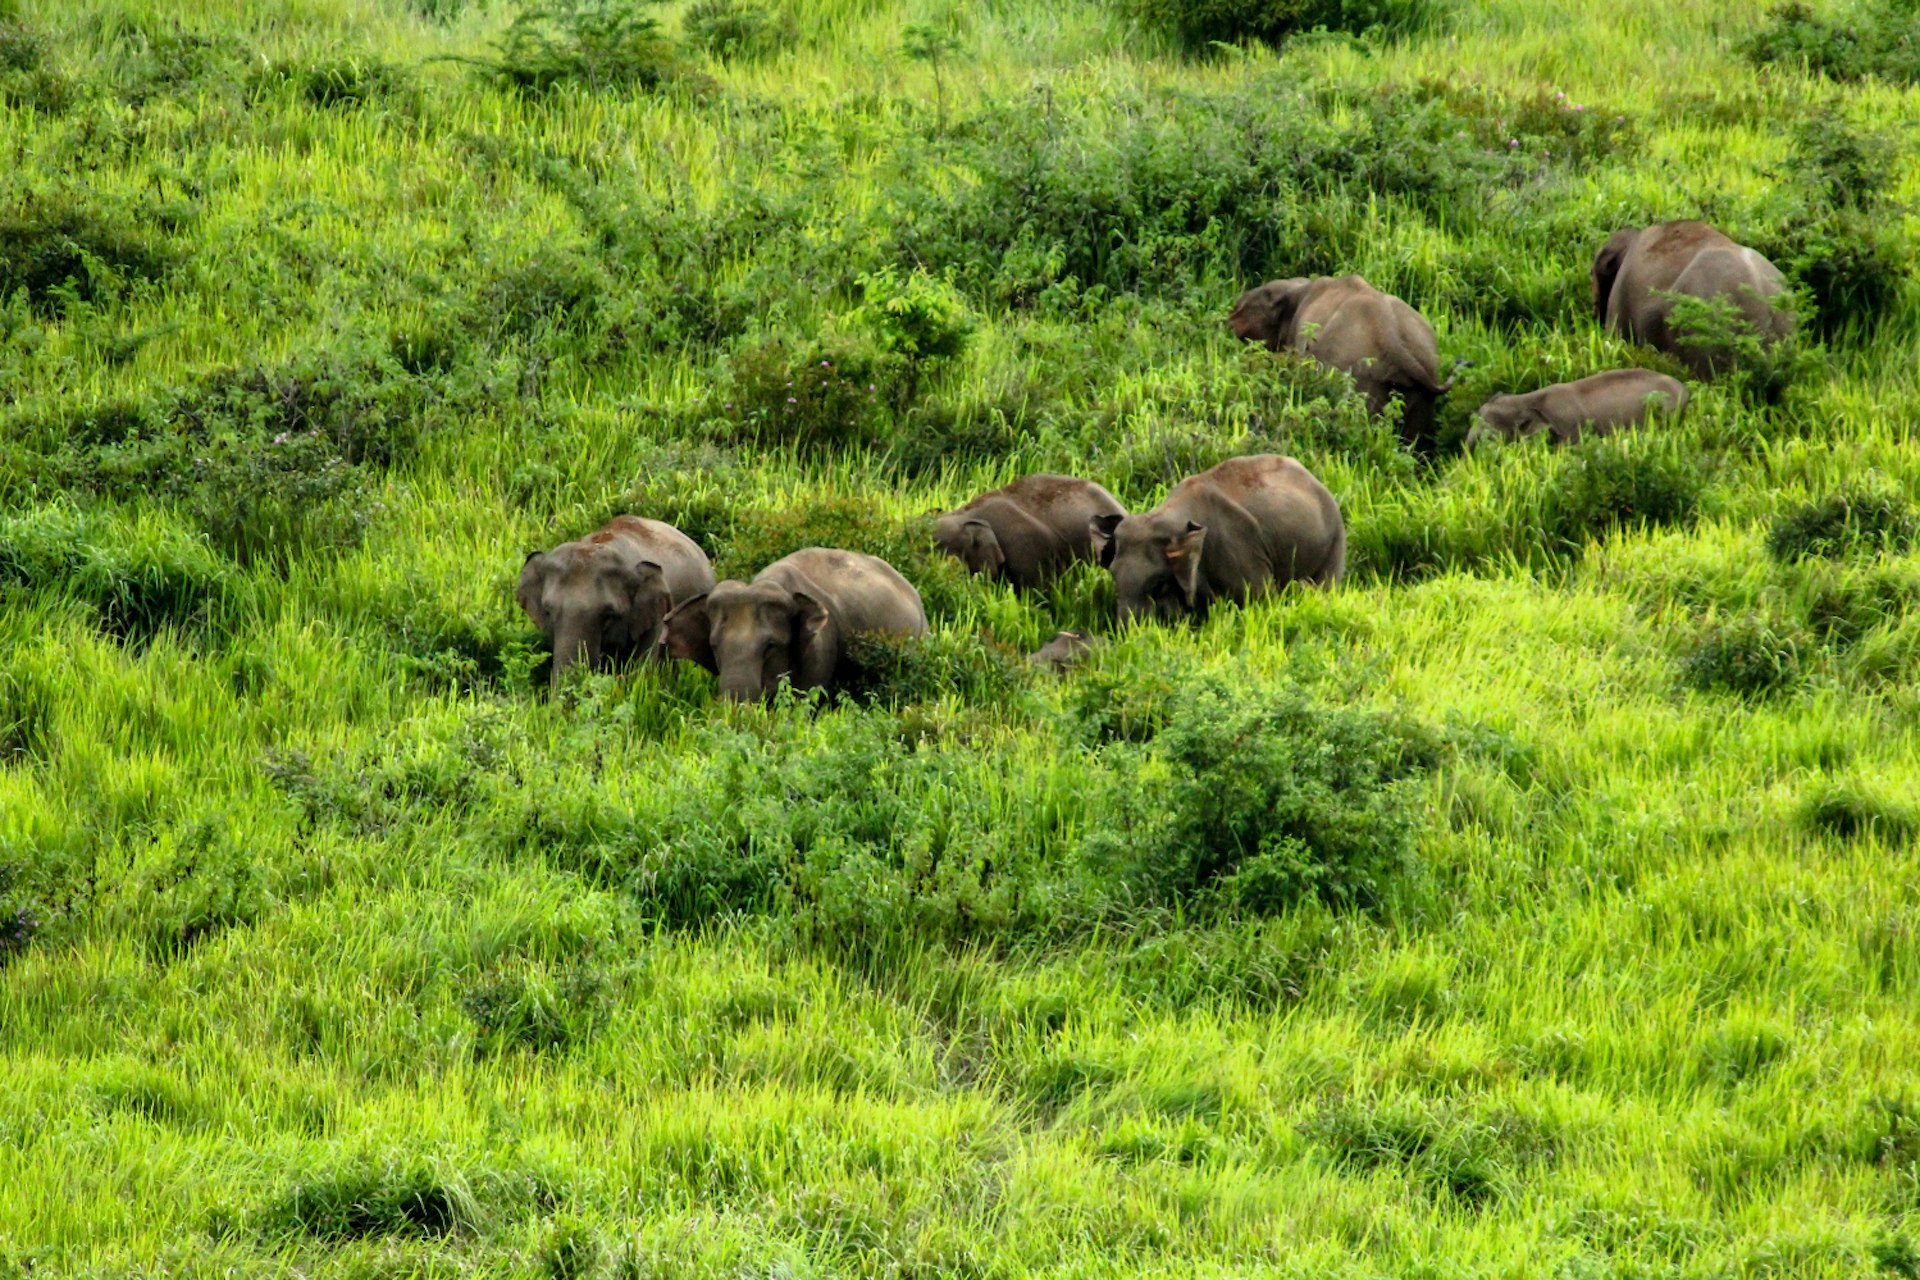 Wild elephants can be spotted in Khao Yai National Park, northeastern Thailand © Bigman365 / Getty Images